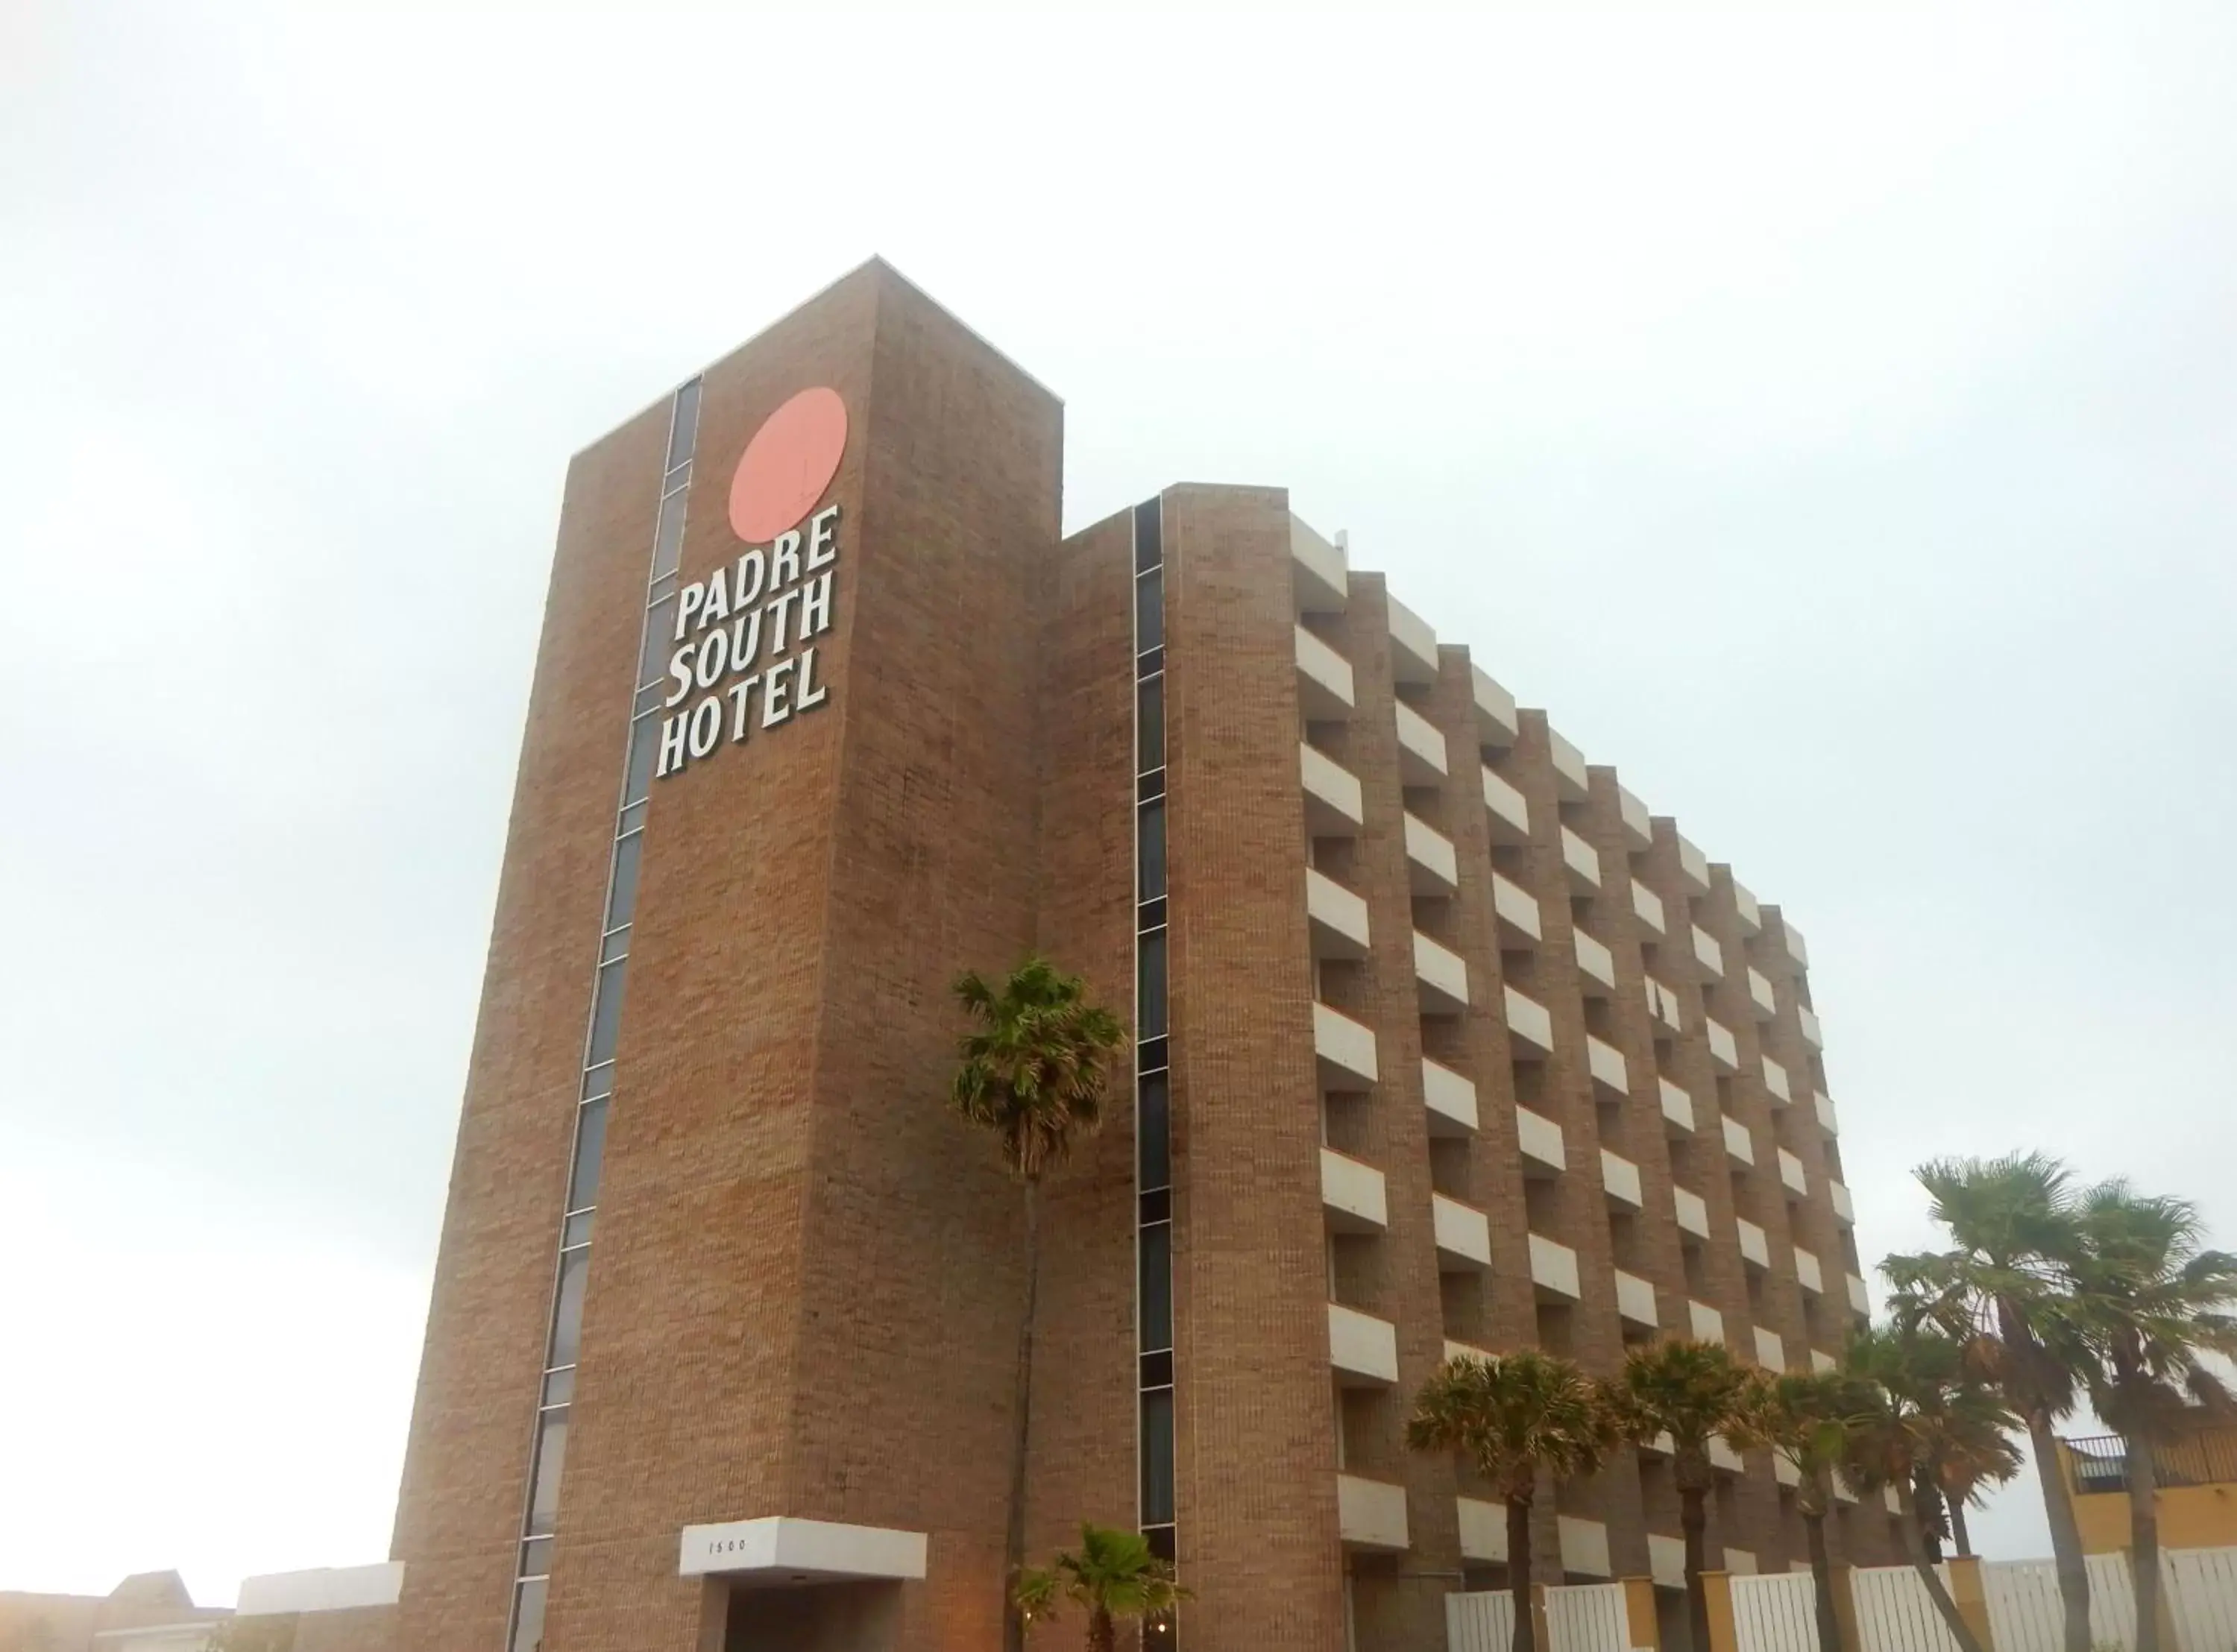 Property Building in Padre South Hotel On The Beach